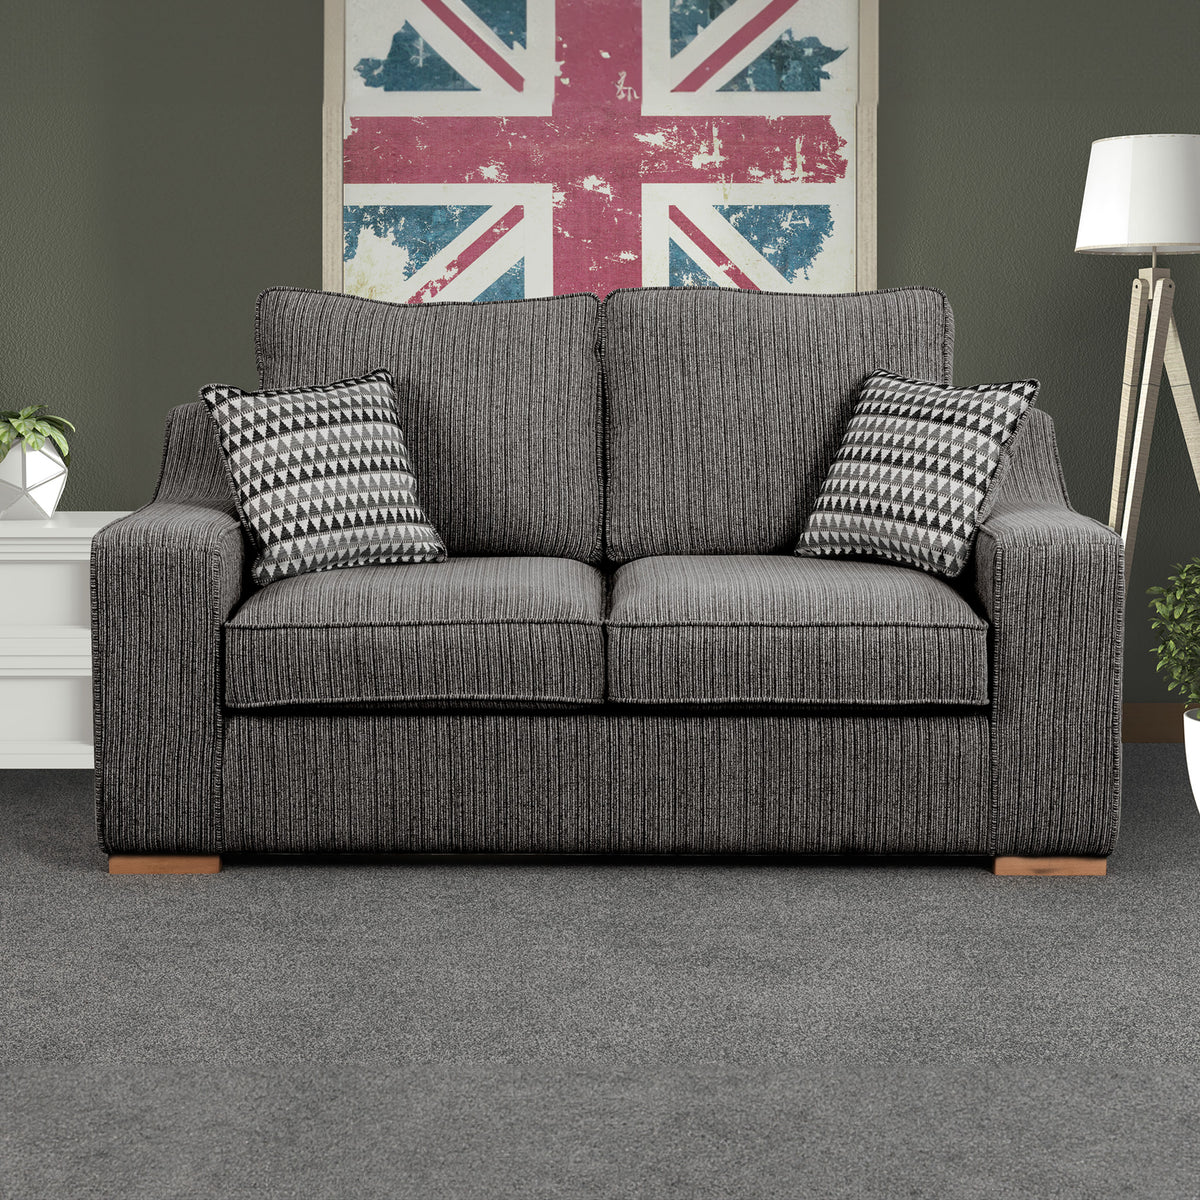 Ashow Charcoal 2 Seater Sofabed with Maika Dusk Scatter Cushions for living room